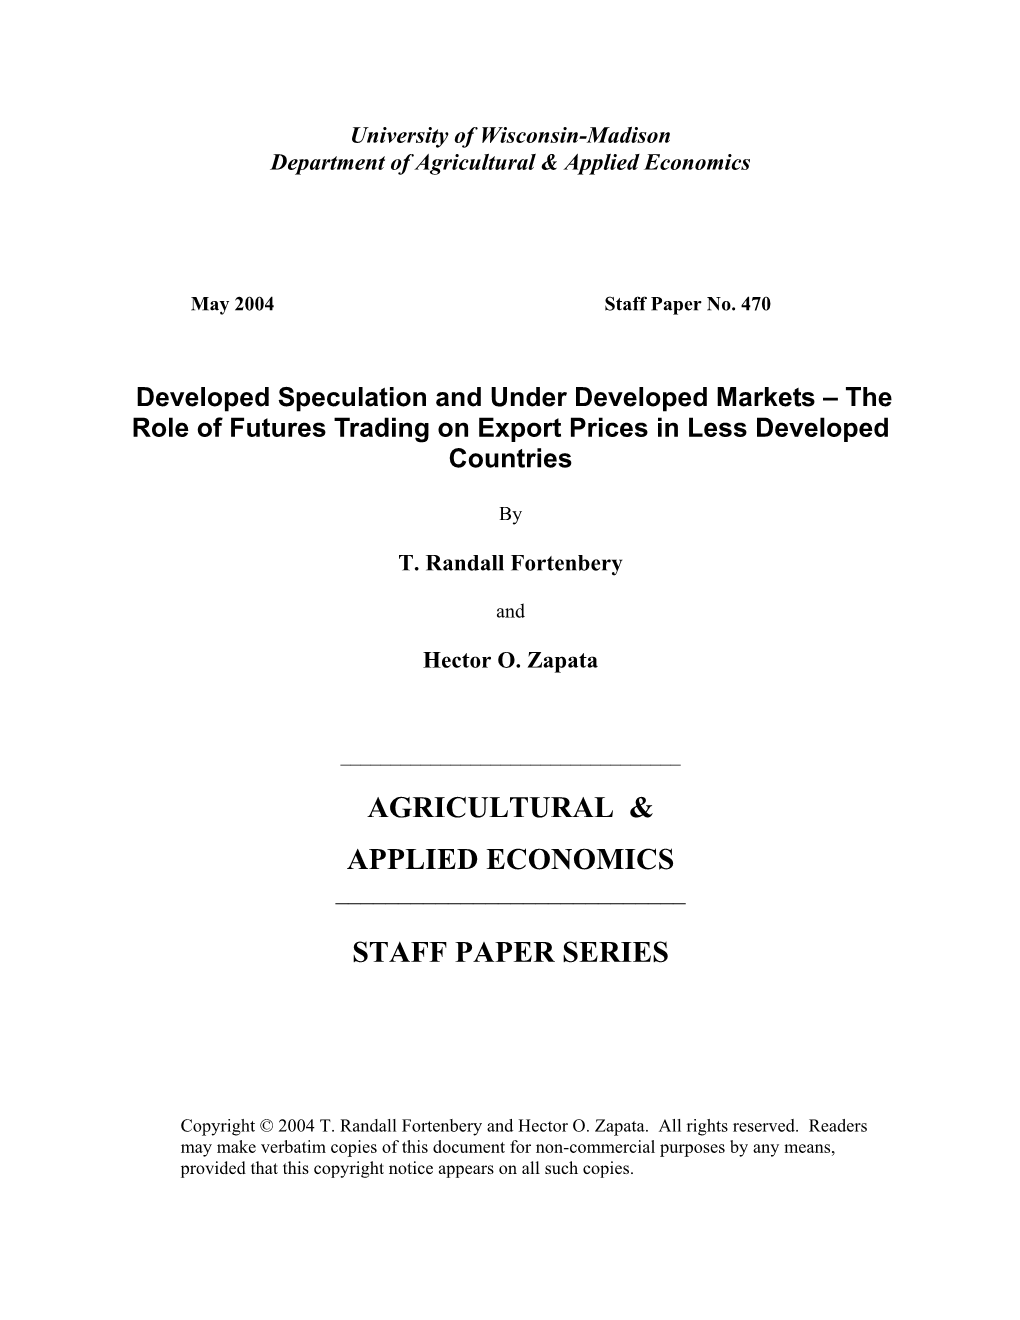 The Role of Futures Trading on Export Prices in Less Developed Countries